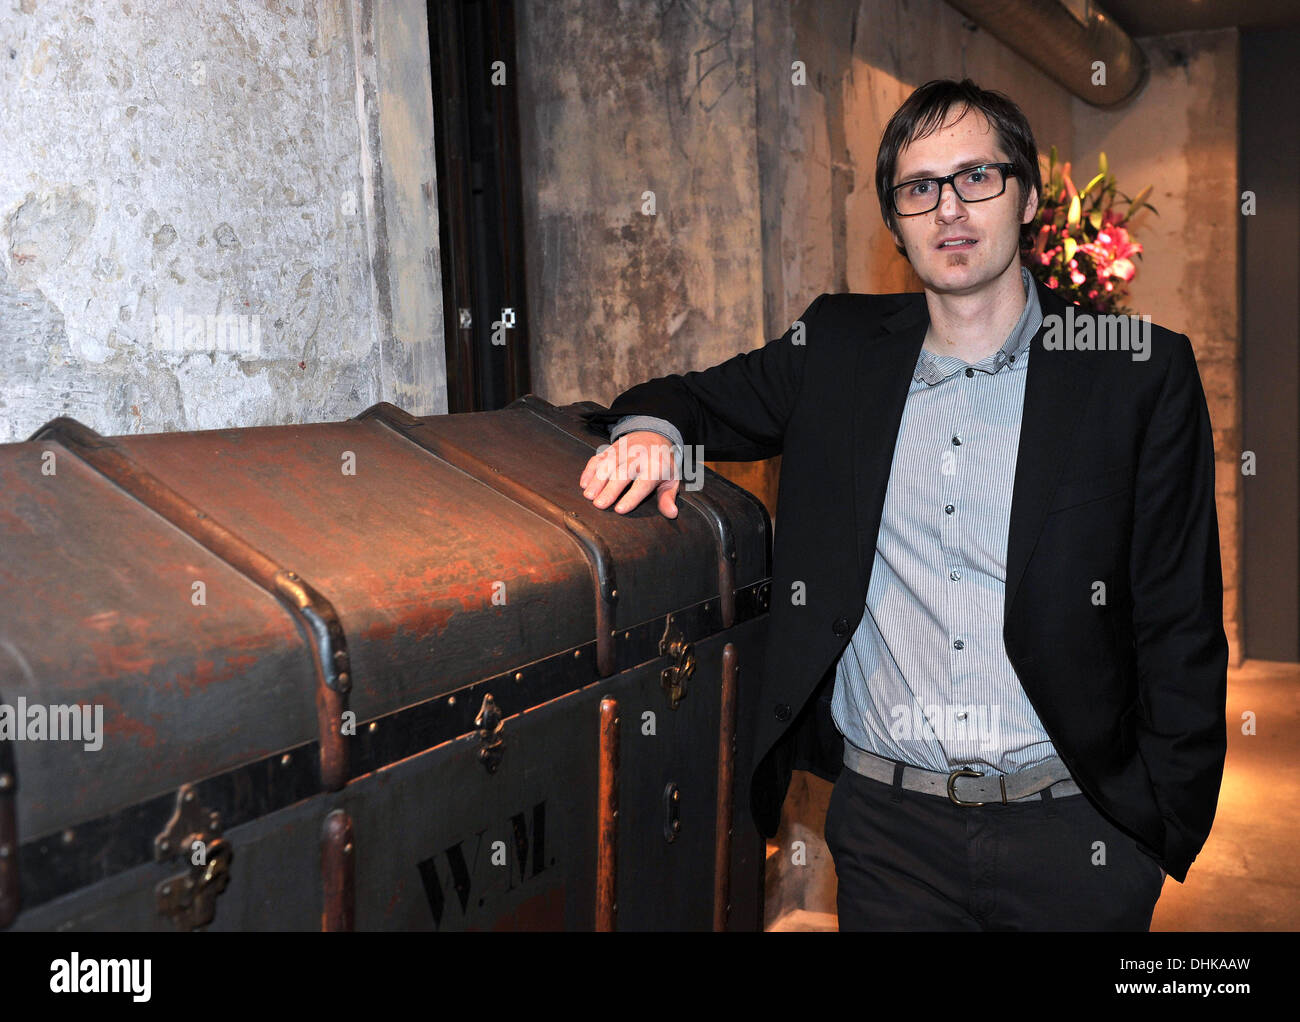 Page 4 - Daniel Koch High Resolution Stock Photography and Images - Alamy